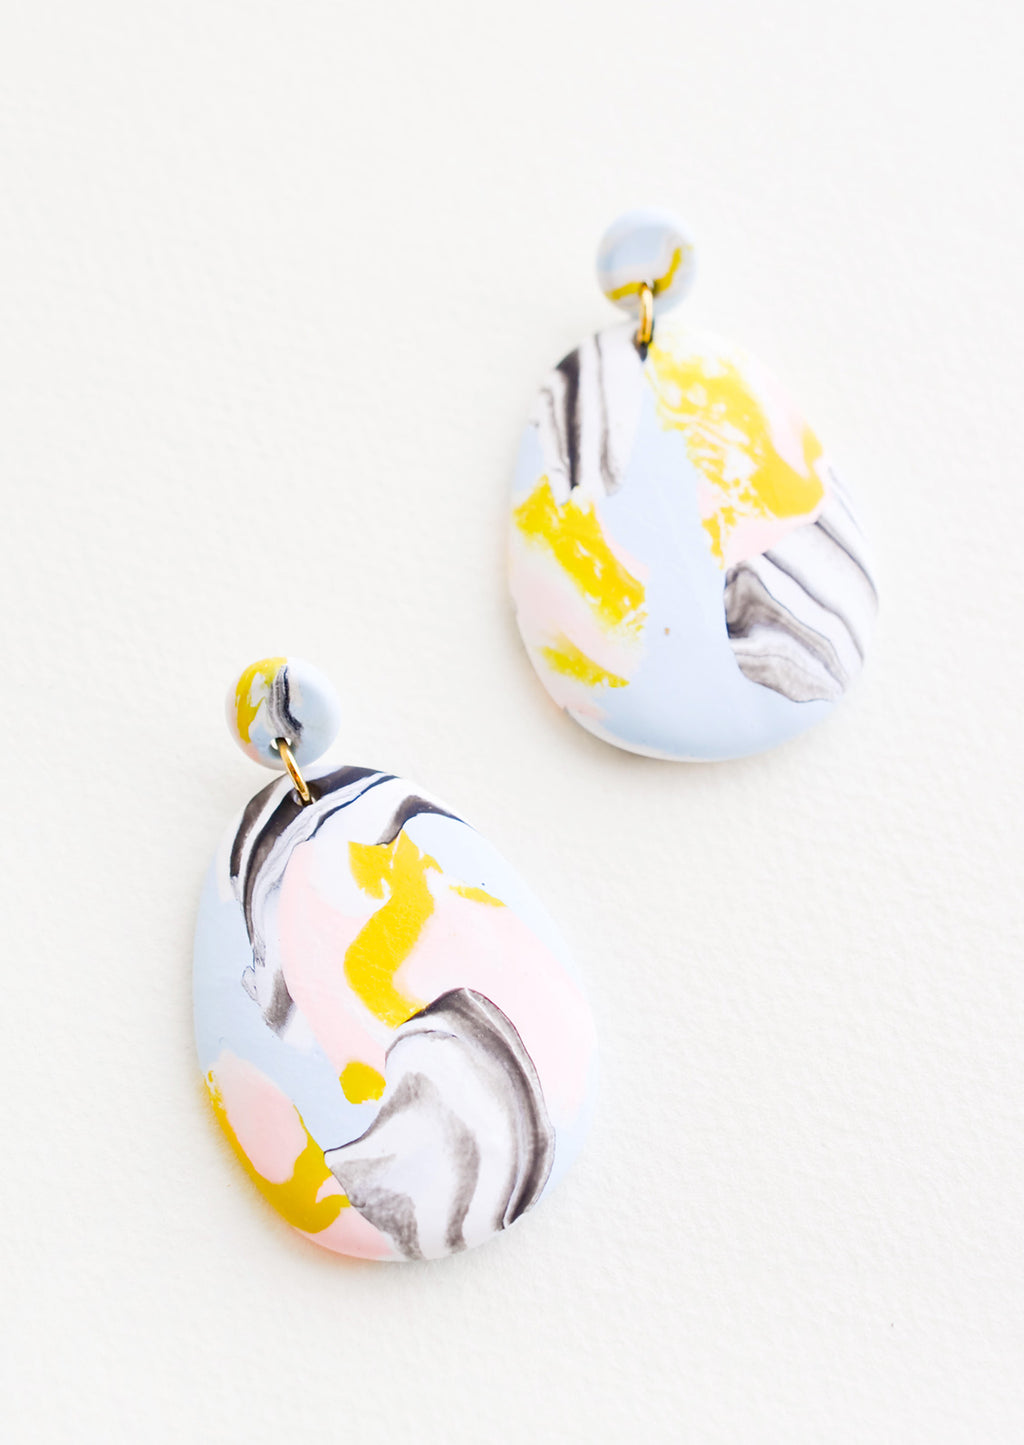 Blue Mist: Blue, pink, yellow, and black marbled clay earrings, with a larger oval dangling from a small circle.